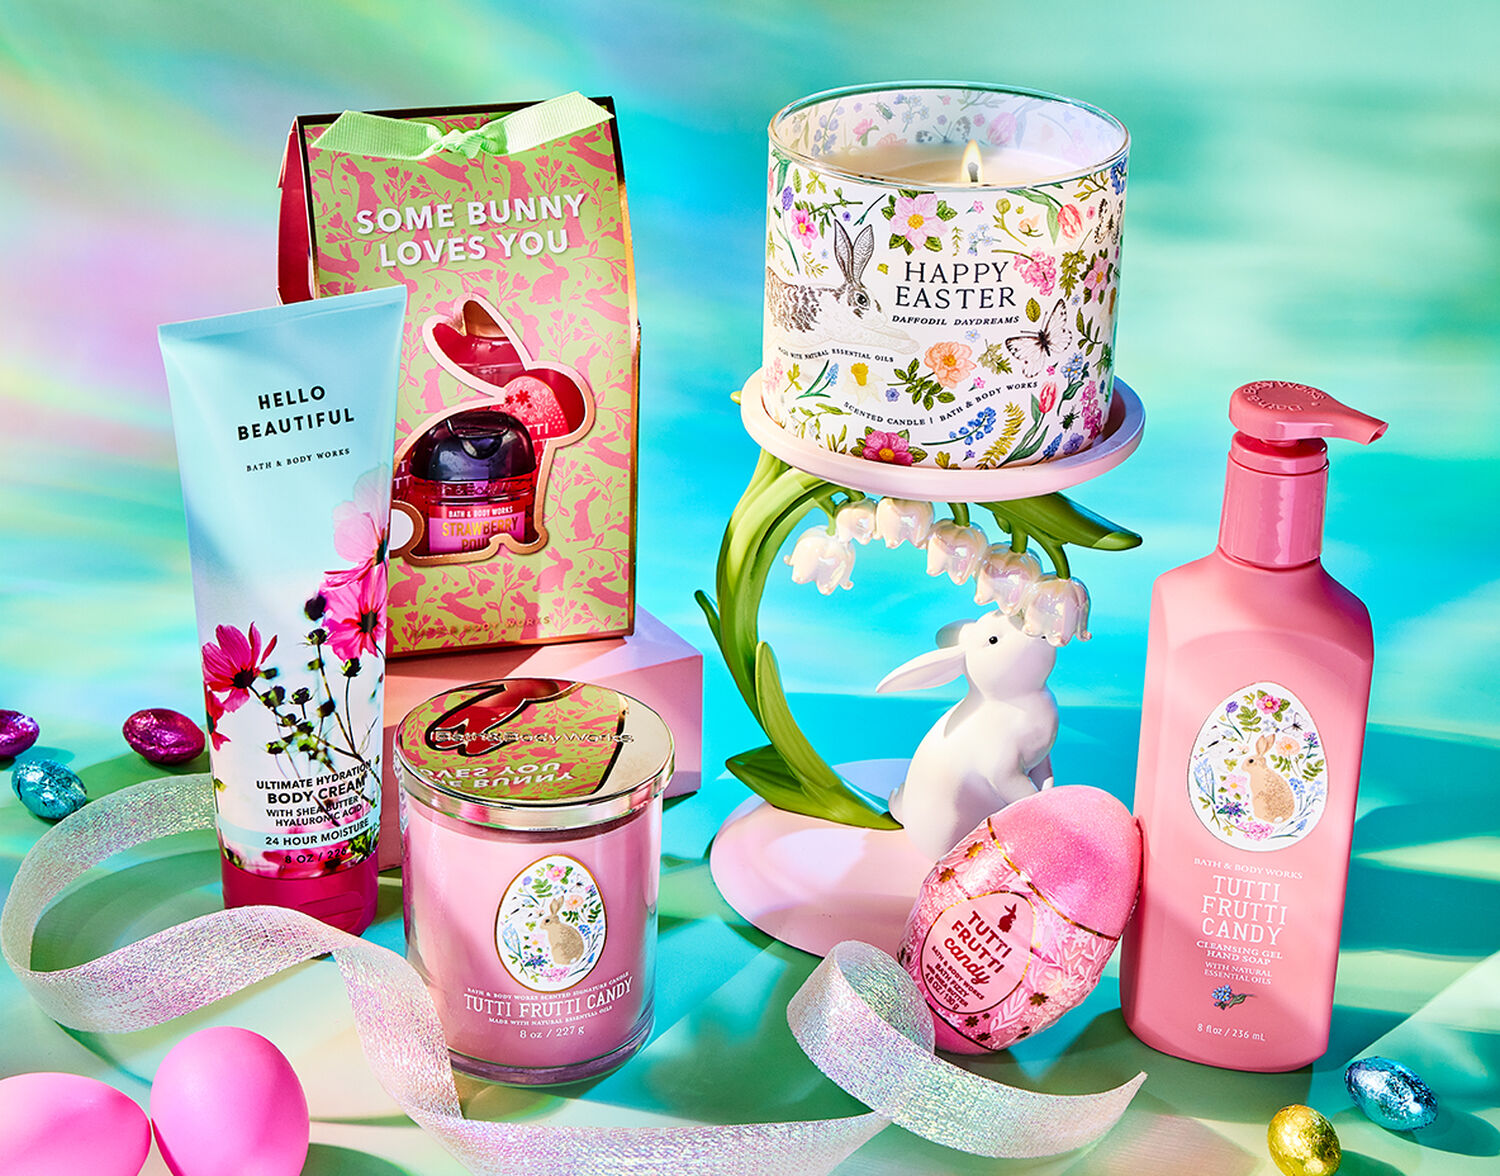 The hunt is on! Peep Easter gifts for everybunny.